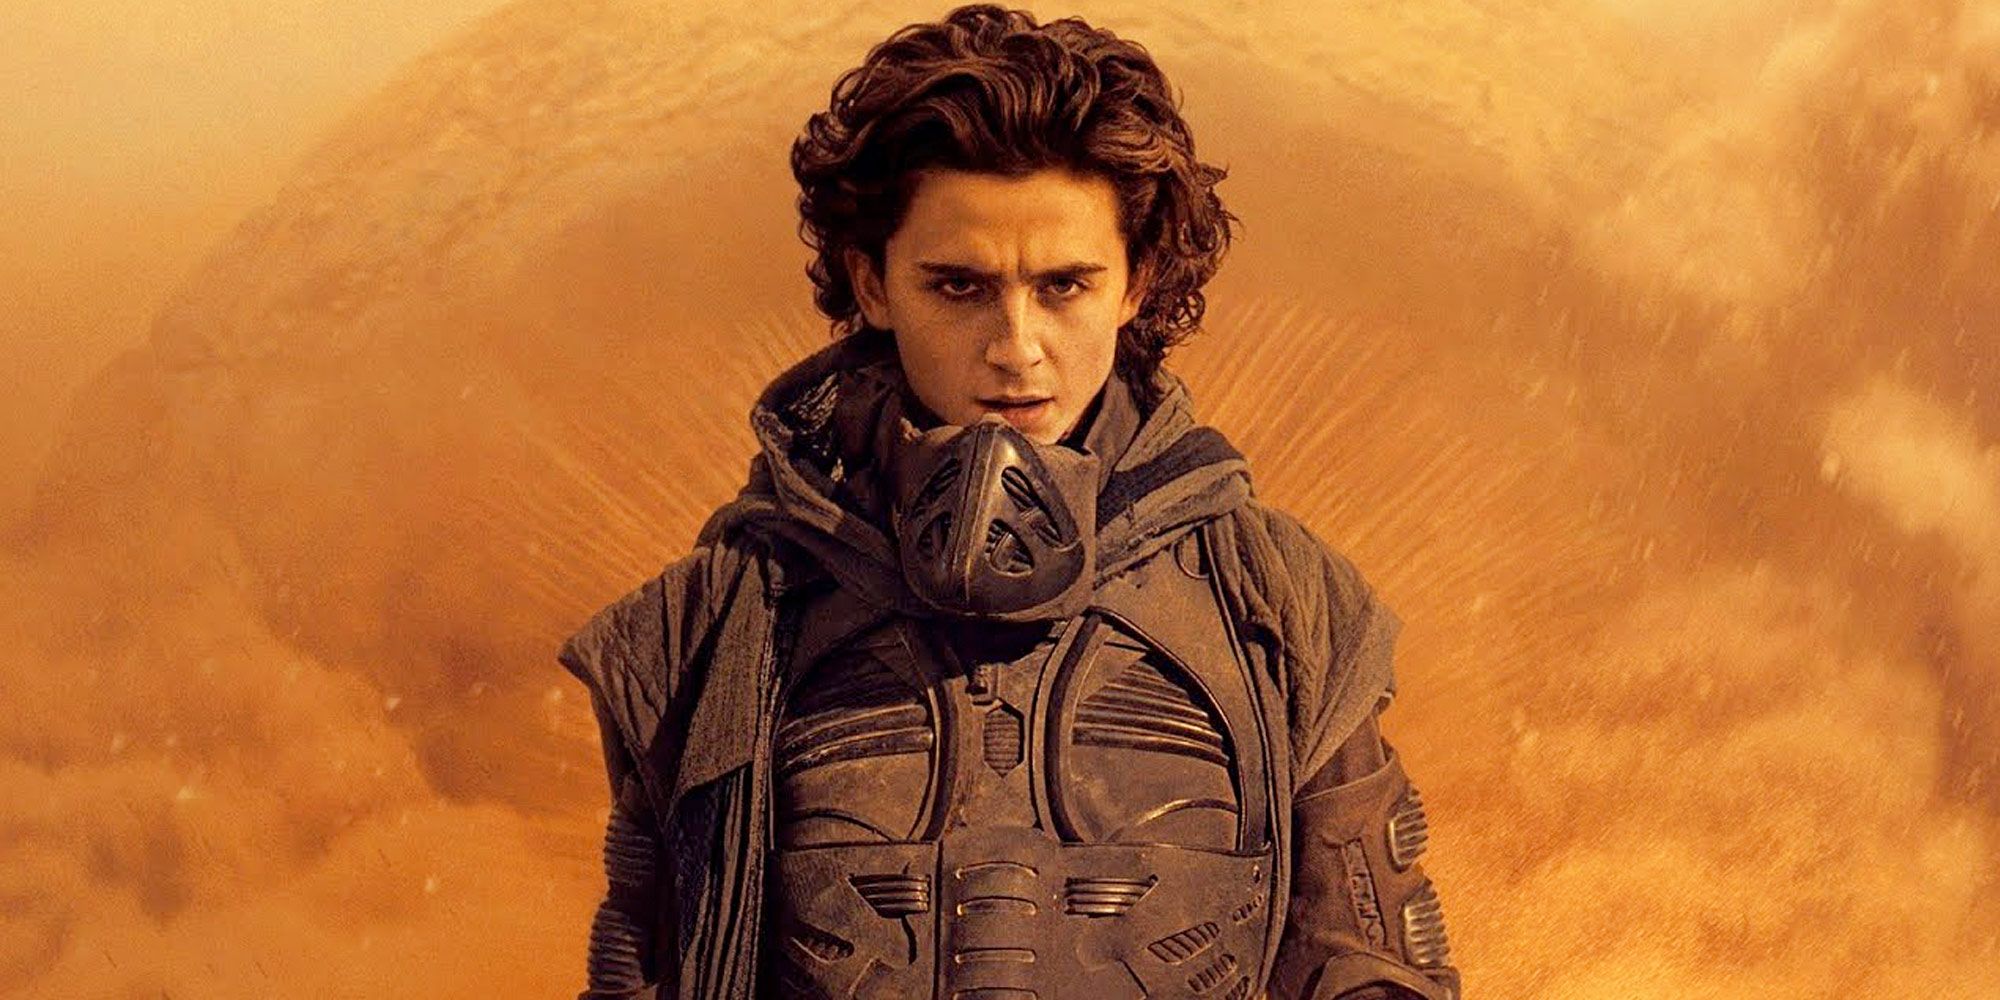 Paul Atreides and a sand worm in Dune.